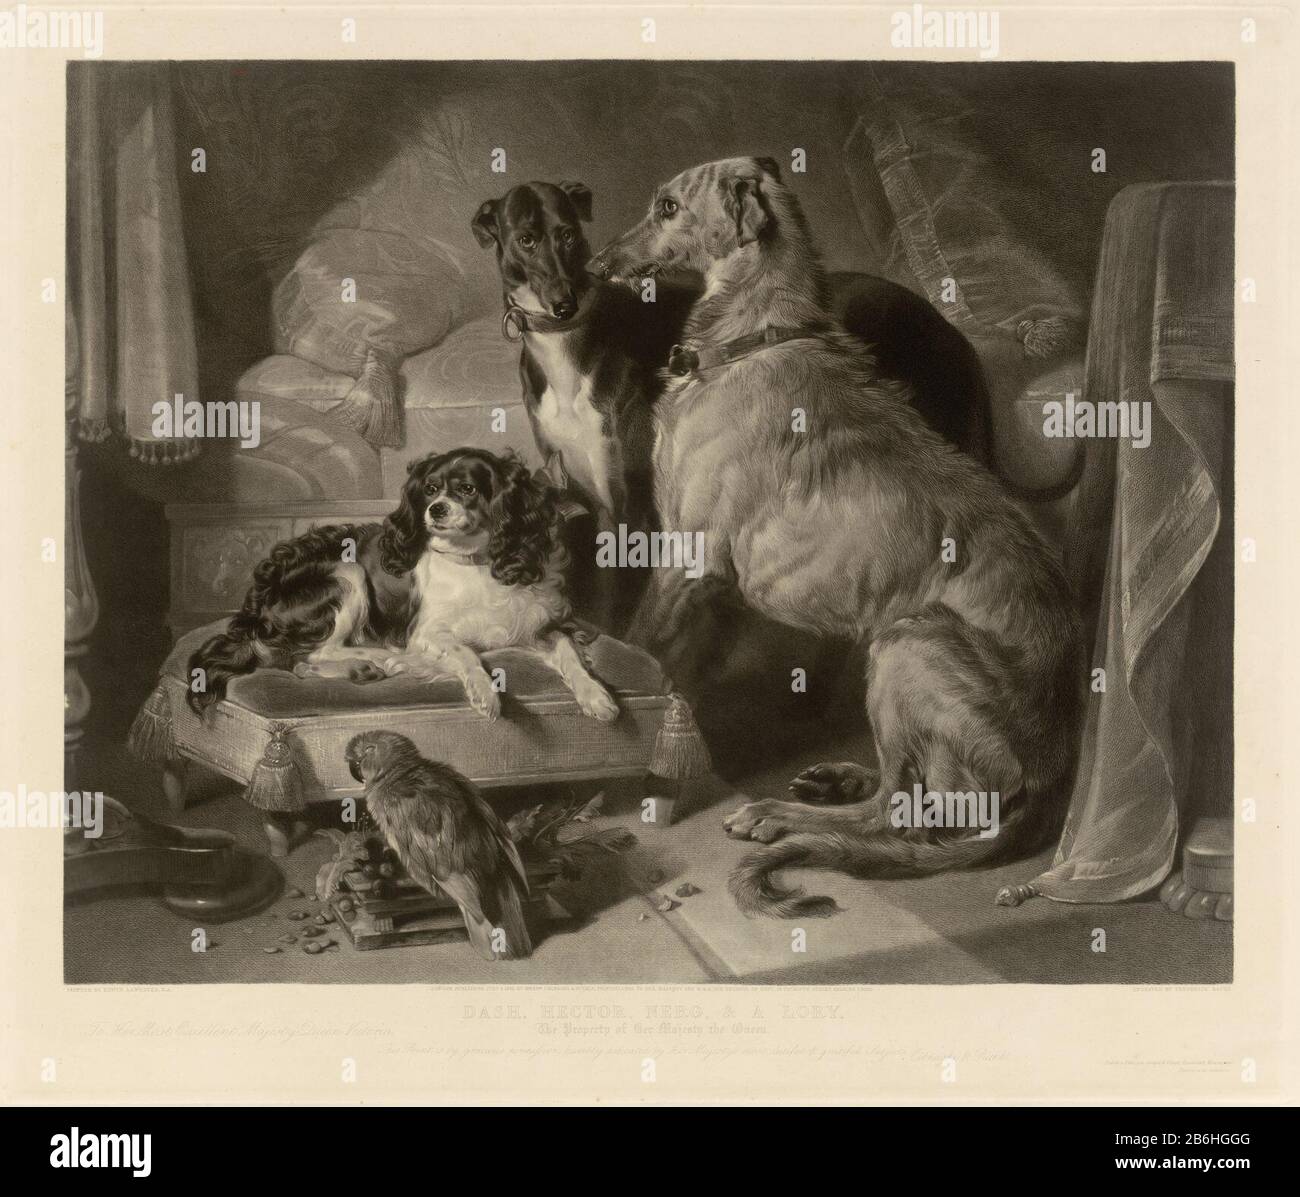 Dash, Hector, Nero, & A Lory Dash, Hector, Nero & A Lory. Object Type : picture Item number: RP-P-OB-70.429X Manufacturer : printmaker: Frederick Bacon to painting by Edwin Henry Landseer Publisher: Colnaghi & Couitgever: Vibert & Cie GoupilPlaats Manufacture: London Date: 1813 - 1887 Physical characteristics: etching, engra and aqua tint material: paper Technique: etching / aqua hue / engra (printing process) Stock Photo